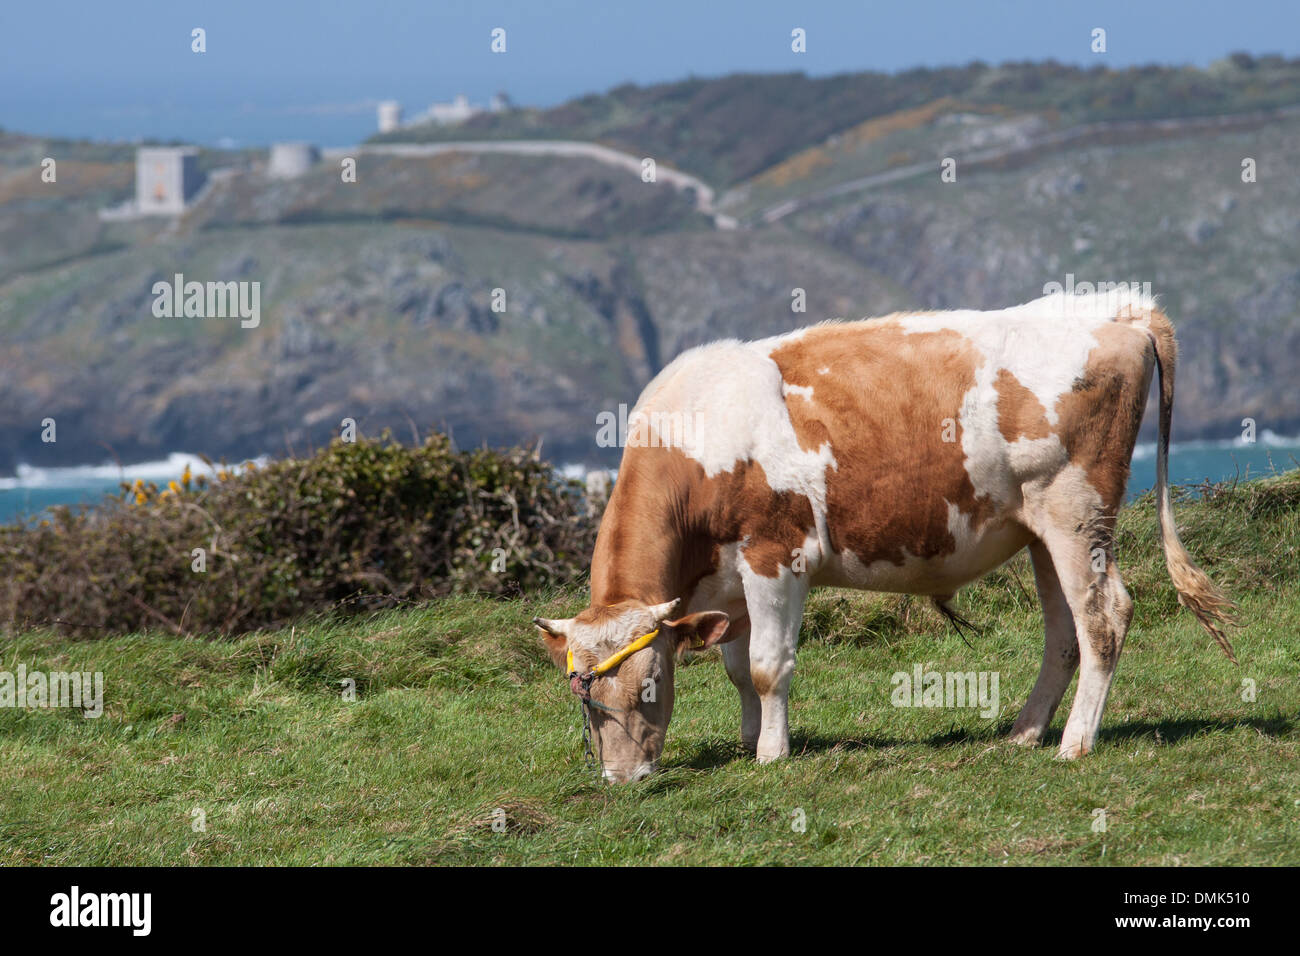 COW GRAZING IN A FIELD ON THE ISLAND OF SARK WITH, IN THE BACKGROUND, THE ISLAND OF BRECQHOU, PROPERTY OF THE BROTHERS DAVID AND FREDERICK BARCLAY, PROPRIETORS OF THE BRITISH NEWSPAPER THE SUNDAY TELEGRAPH, ISLAND OF SARK, CHANNEL ISLANDS Stock Photo